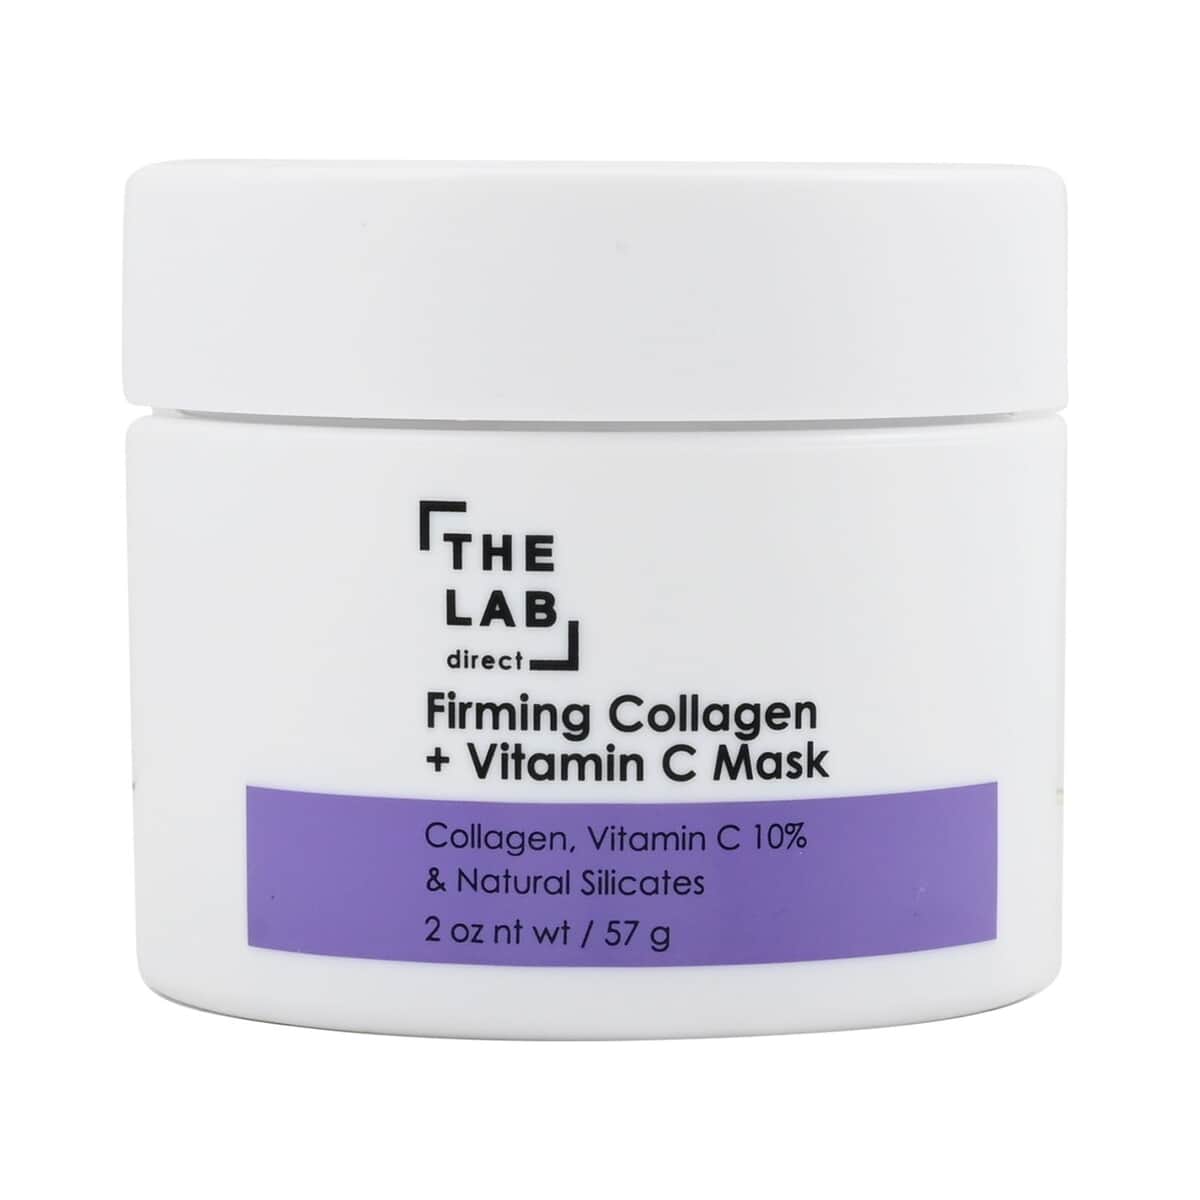 The Lab Direct Firming Collagen and Vitamin C Mask (2oz) image number 0